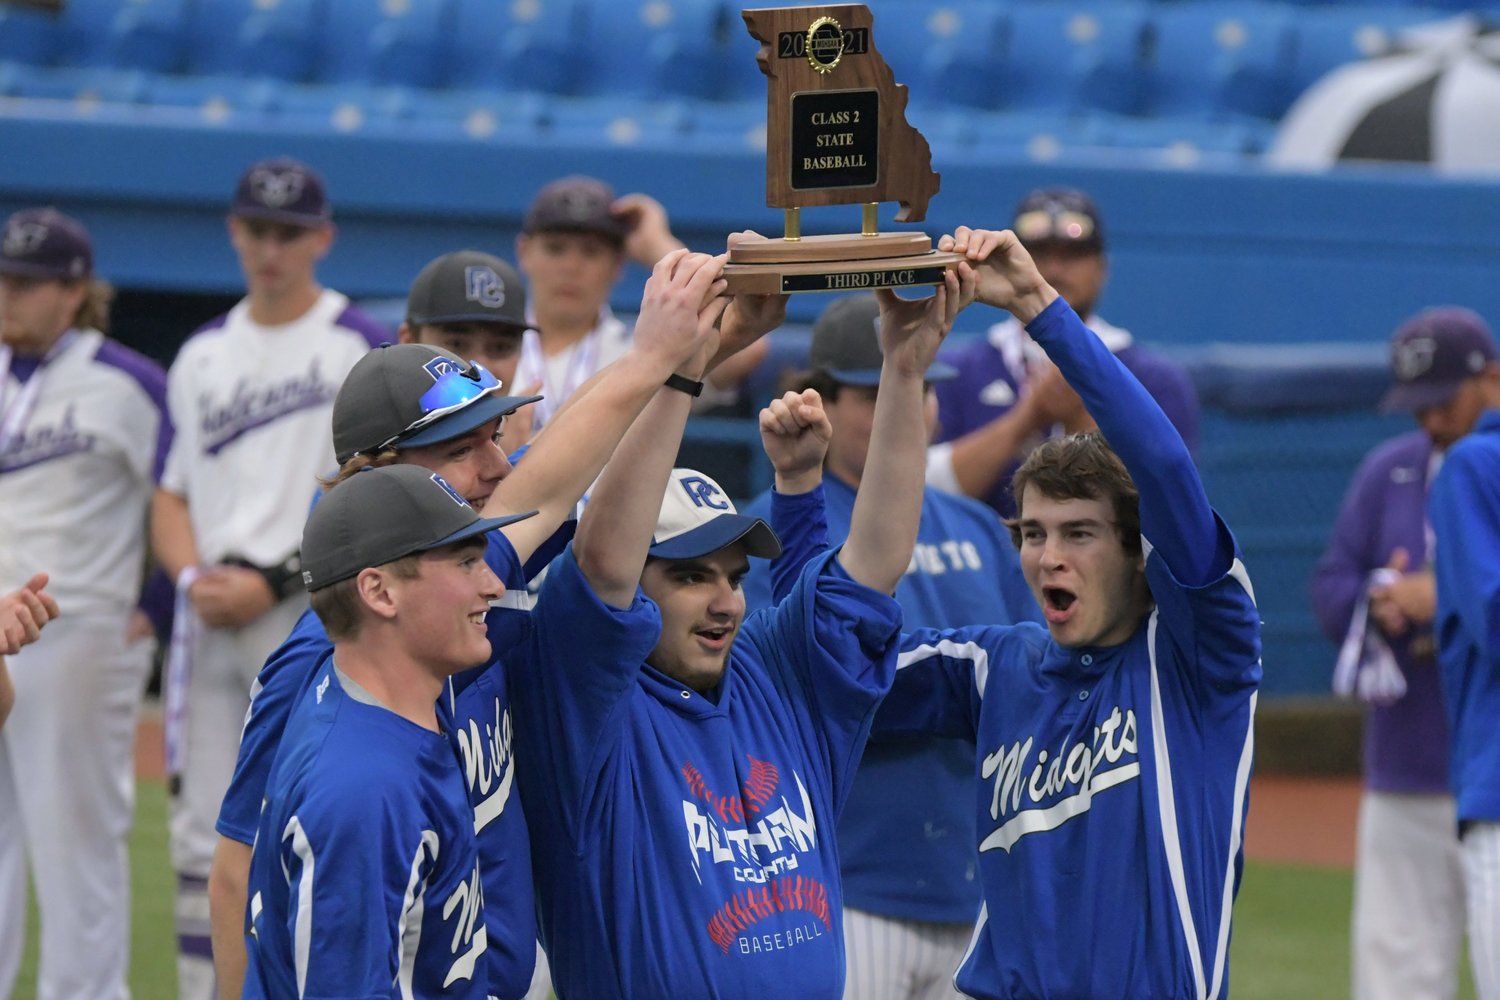 Members of the Putnam County baseball team hoist their third-place trophy after defeating Holcomb.